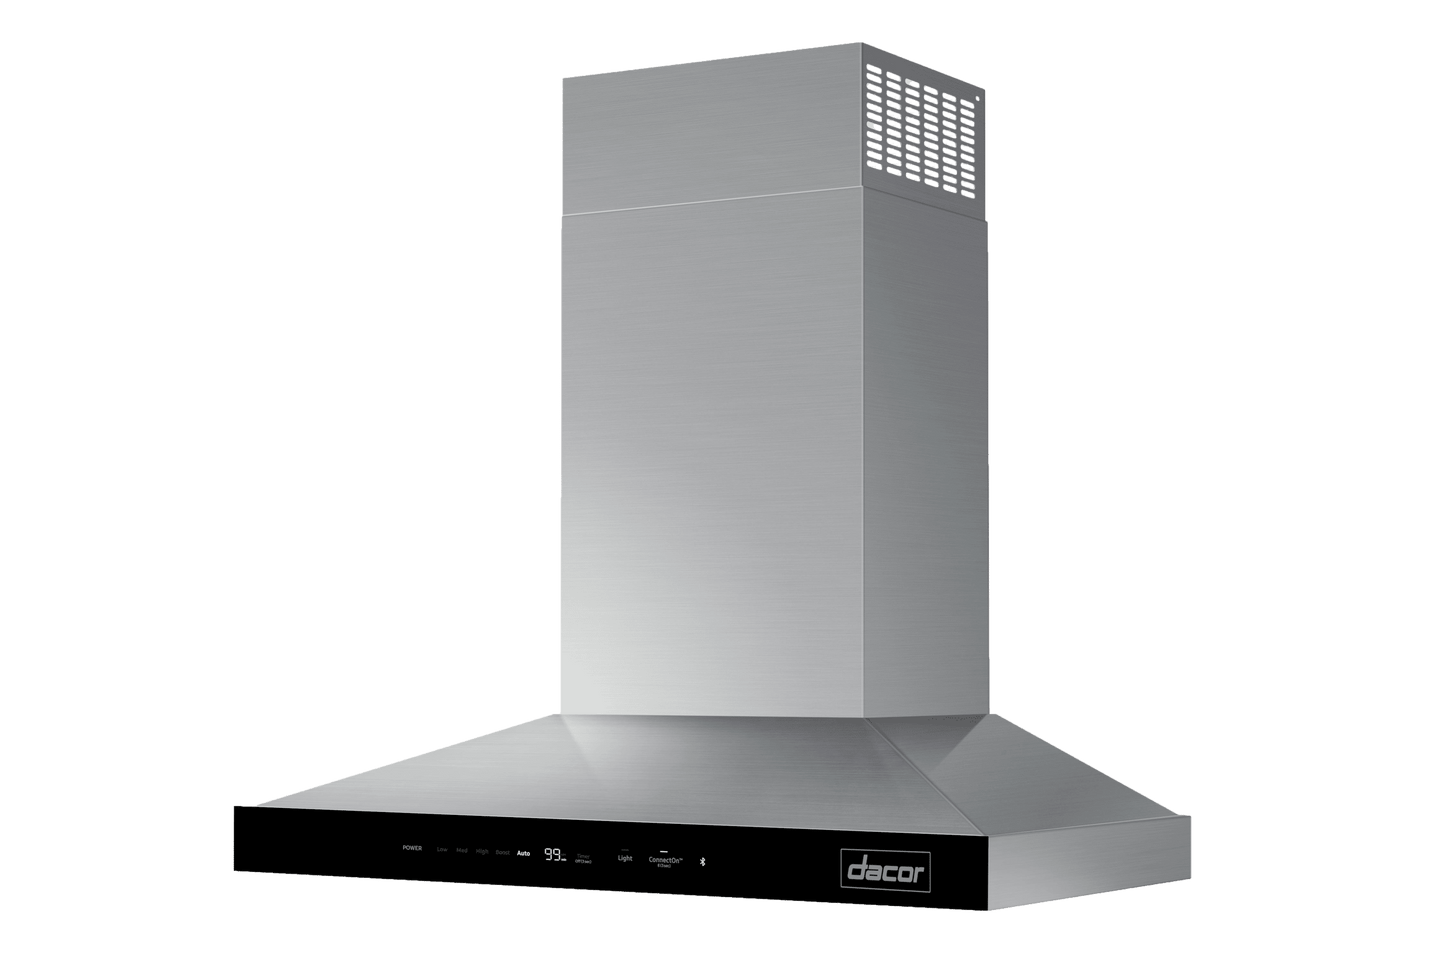 Dacor DHD30M700WM 30" Wall Hood With Connectivity, Graphite Stainless Steel